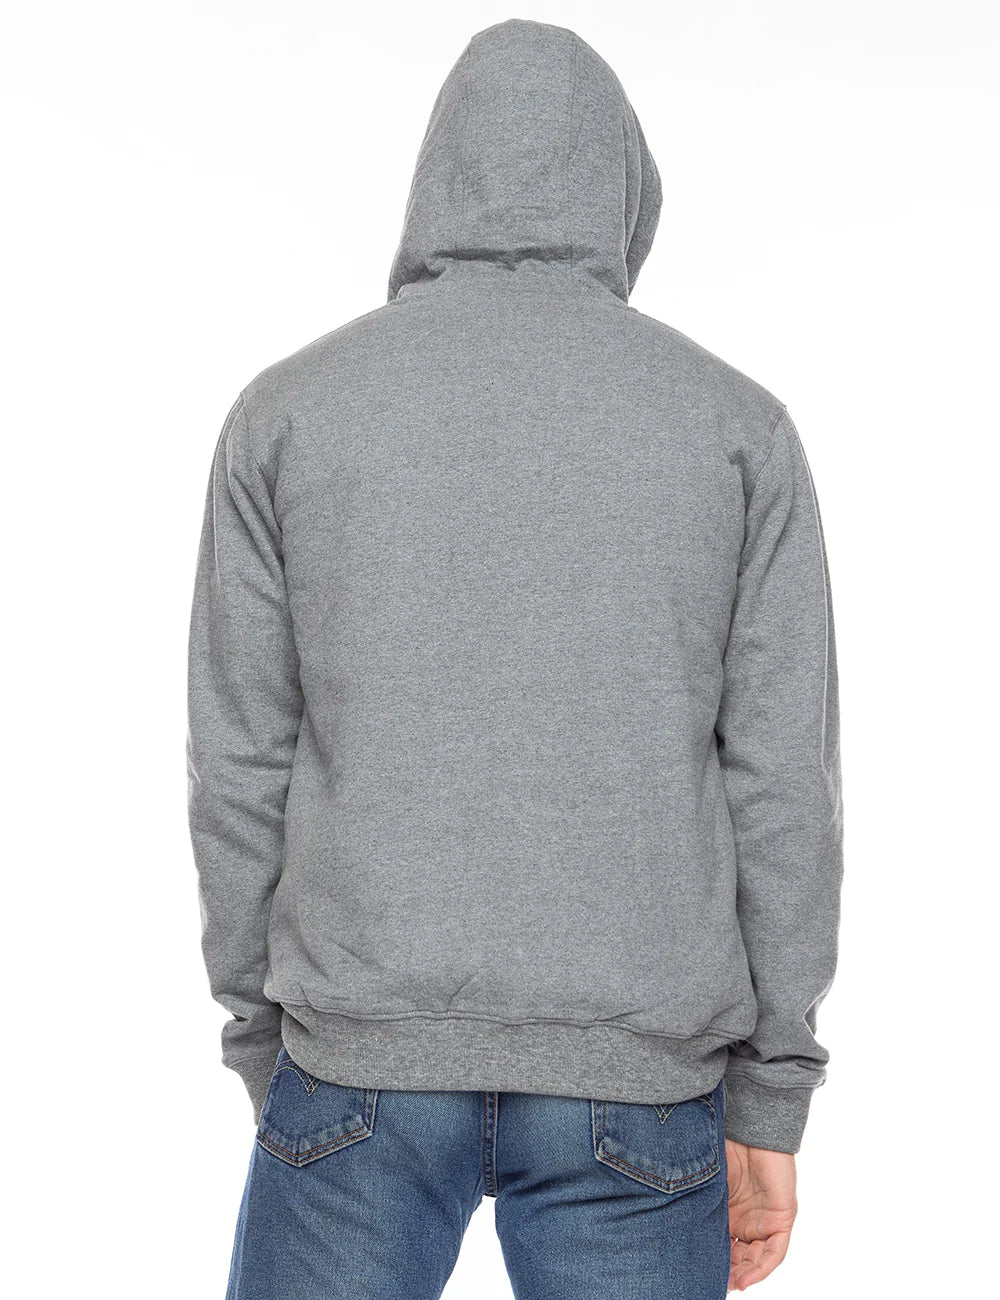 An easy-fitting hoodie&nbsp;bursting with sherpa inside - even the hood has fluff!